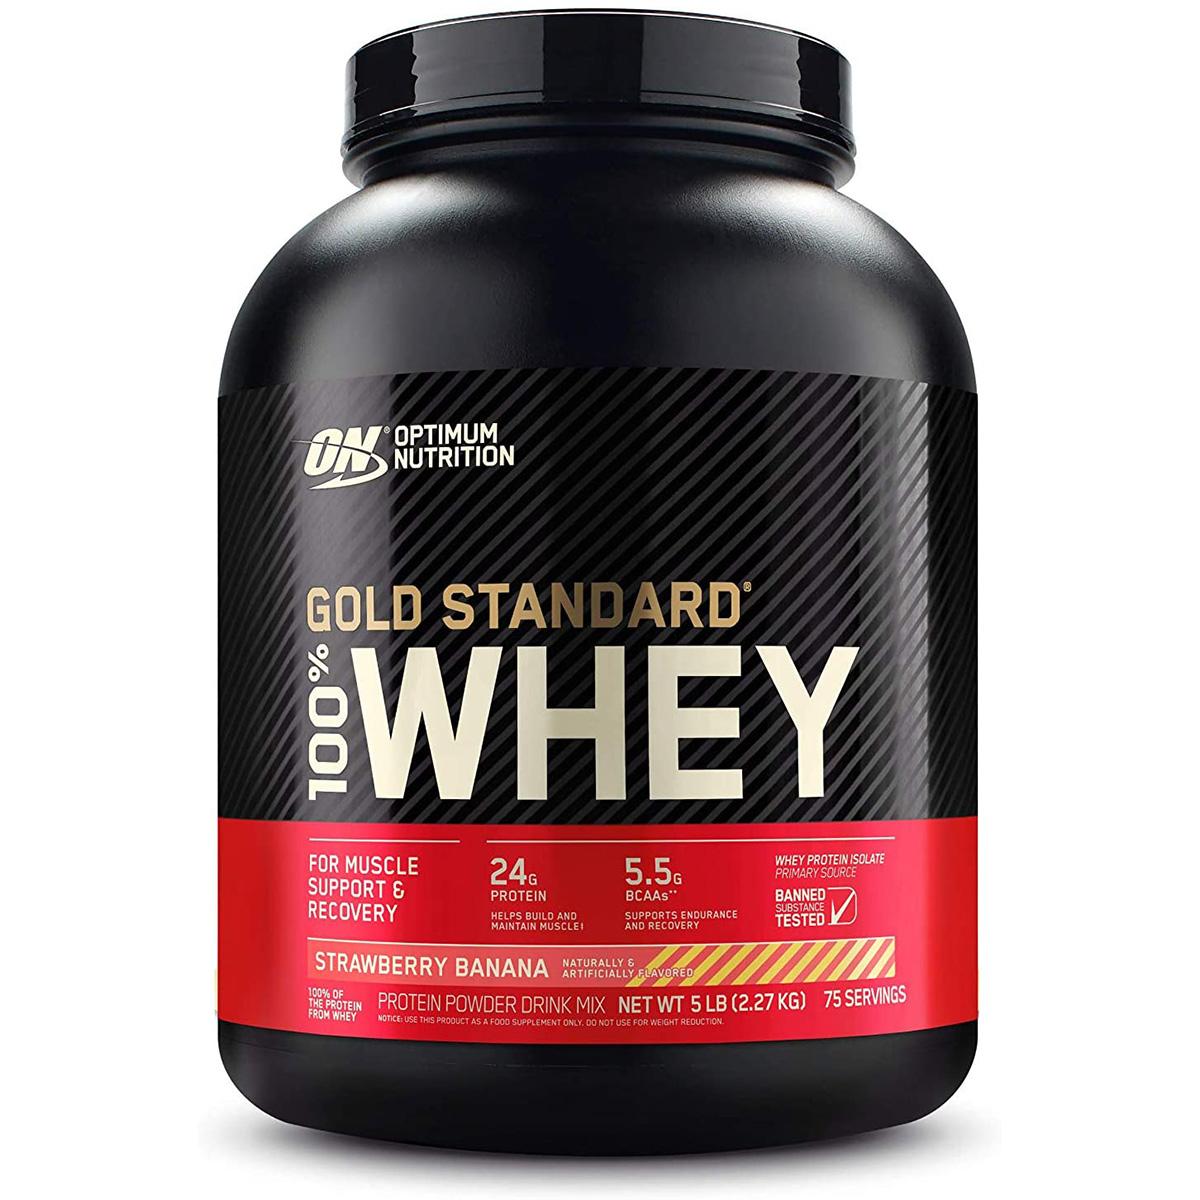 10lbs Optimum Nutrition Gold Standard Whey Protein for $57.61 Shipped